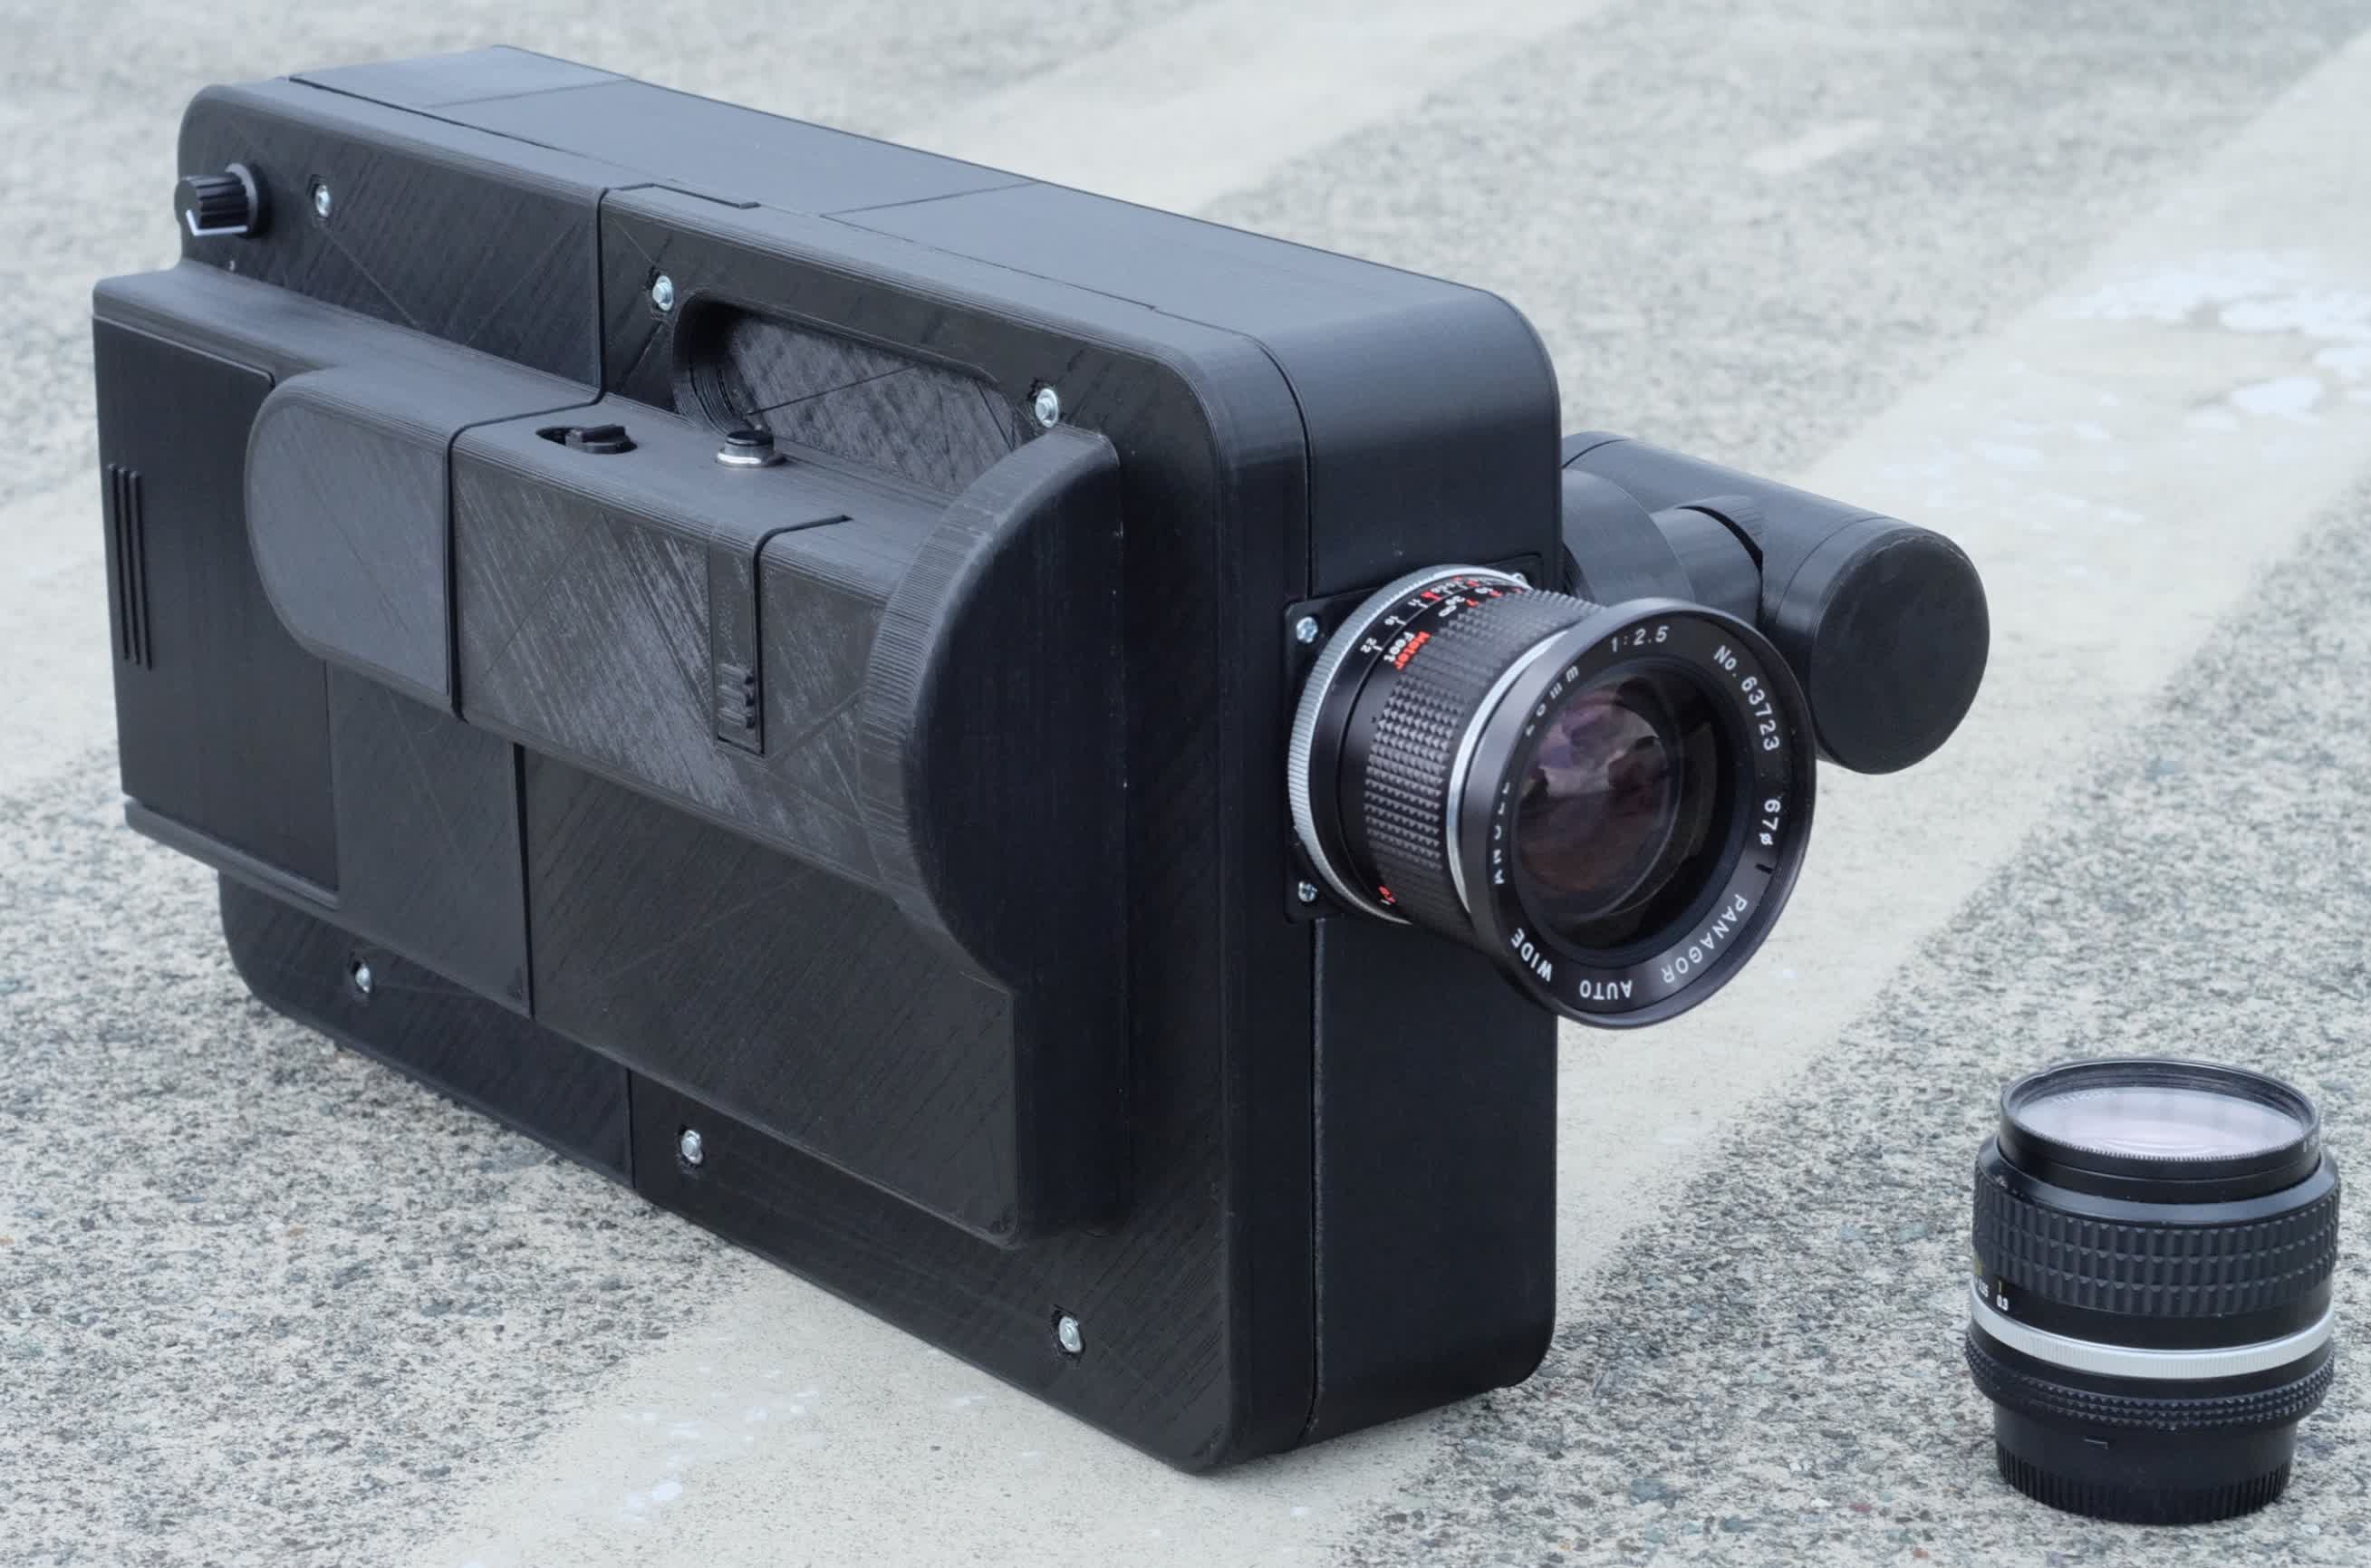 YouTuber designs and 3D prints a 35mm analog video camera